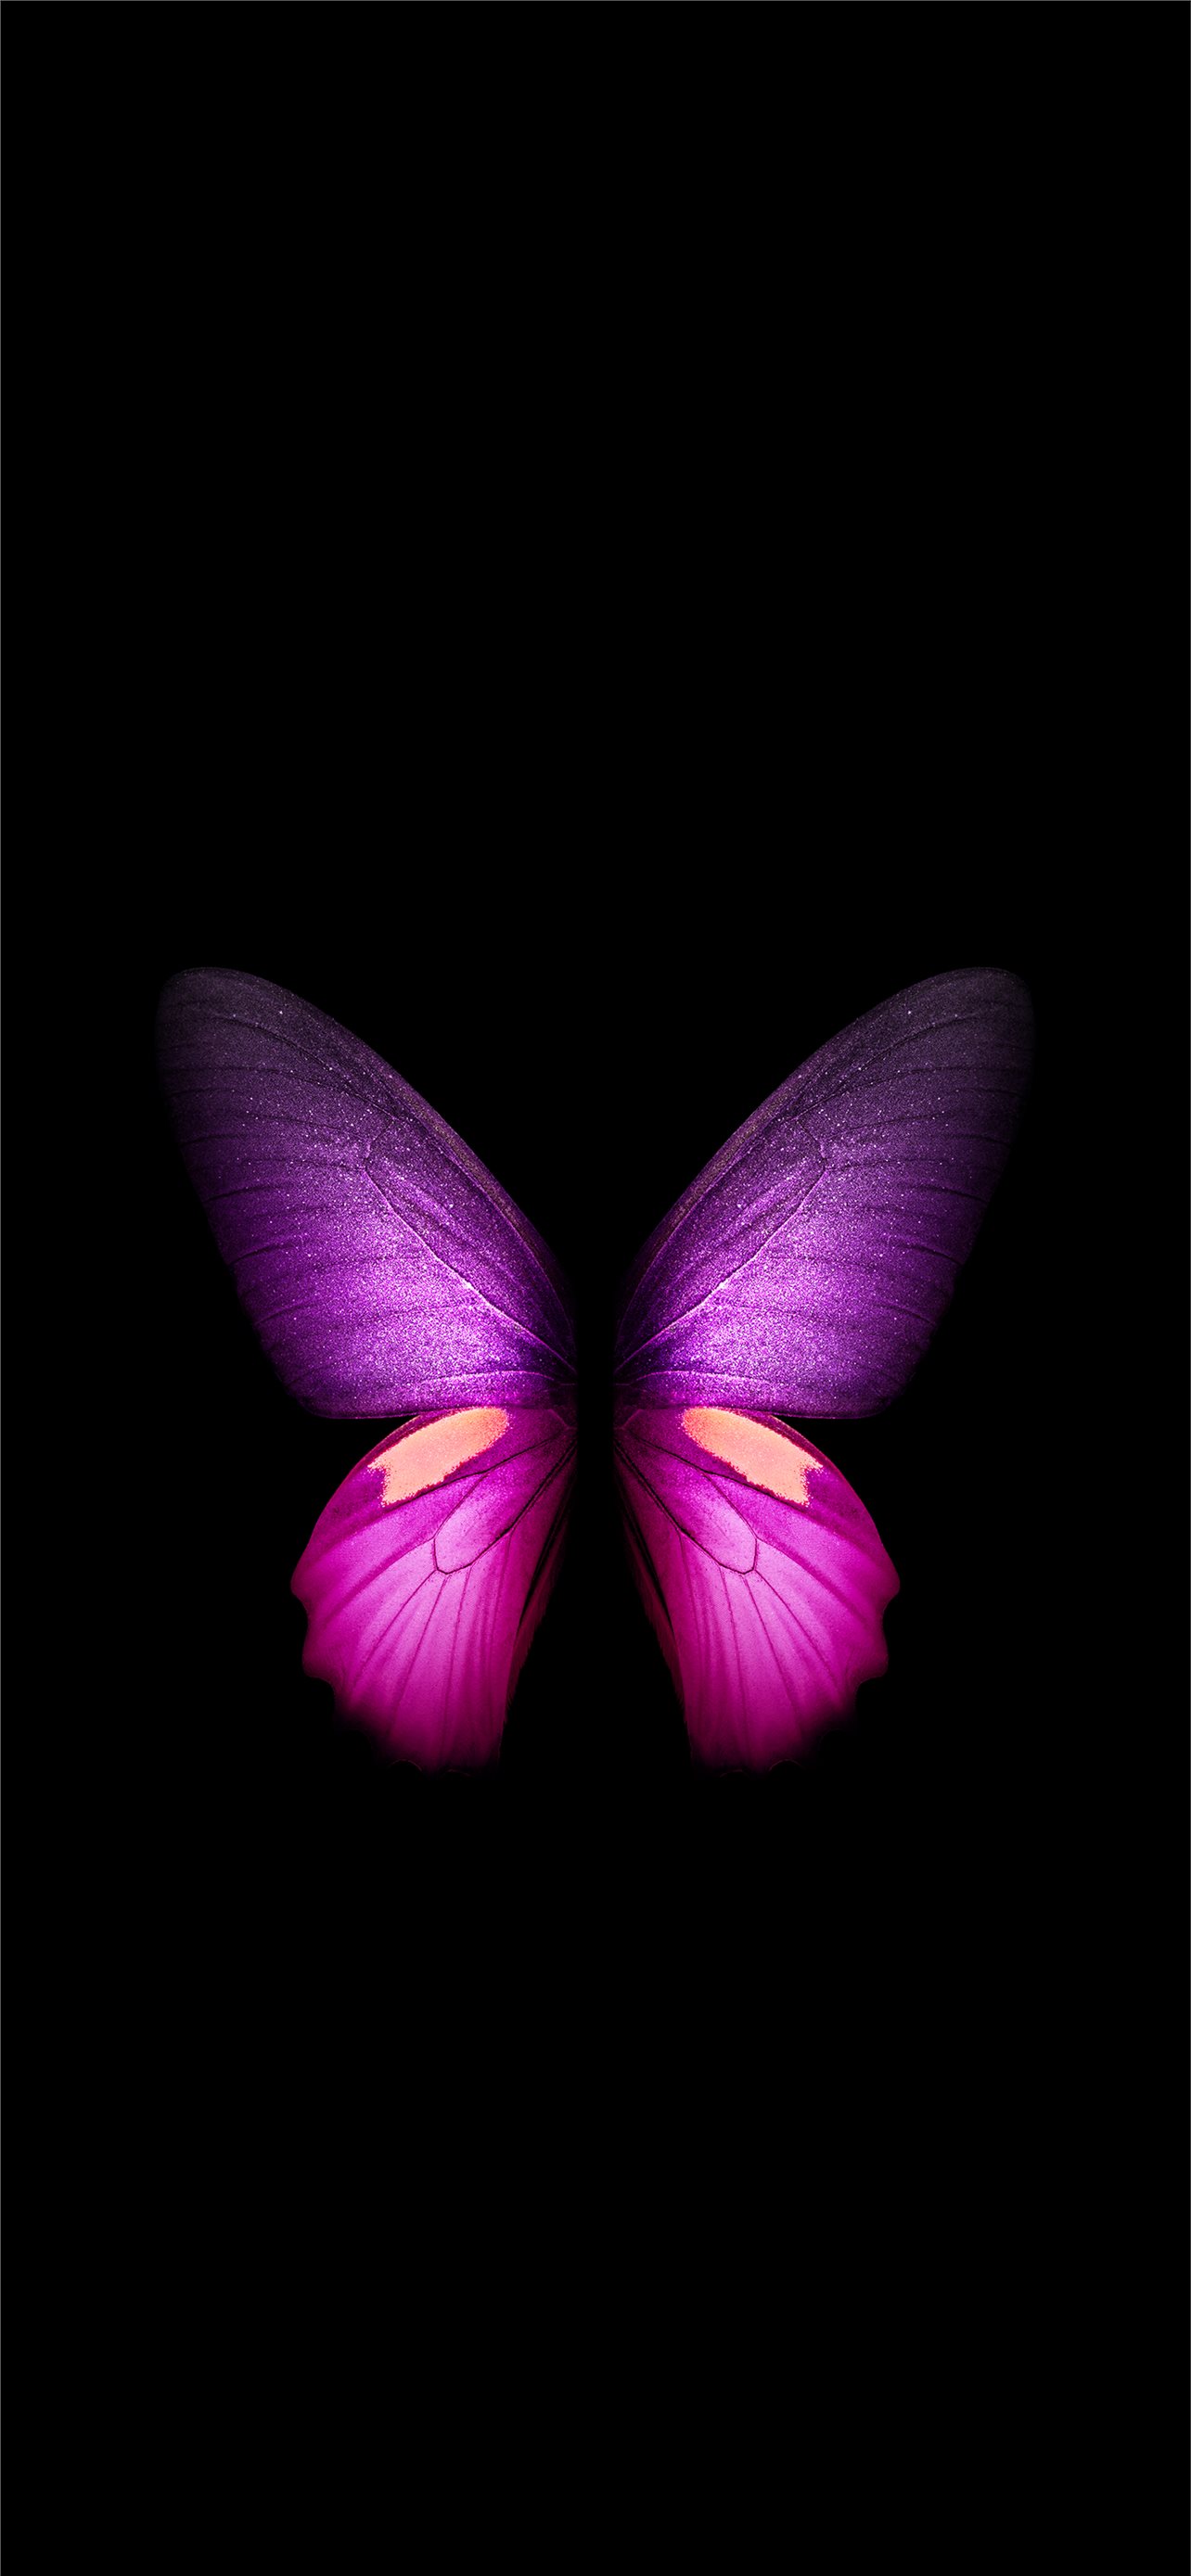 pink butterfly background  Pink glitter wallpaper Pink wallpaper girly Pink  wallpaper iphone